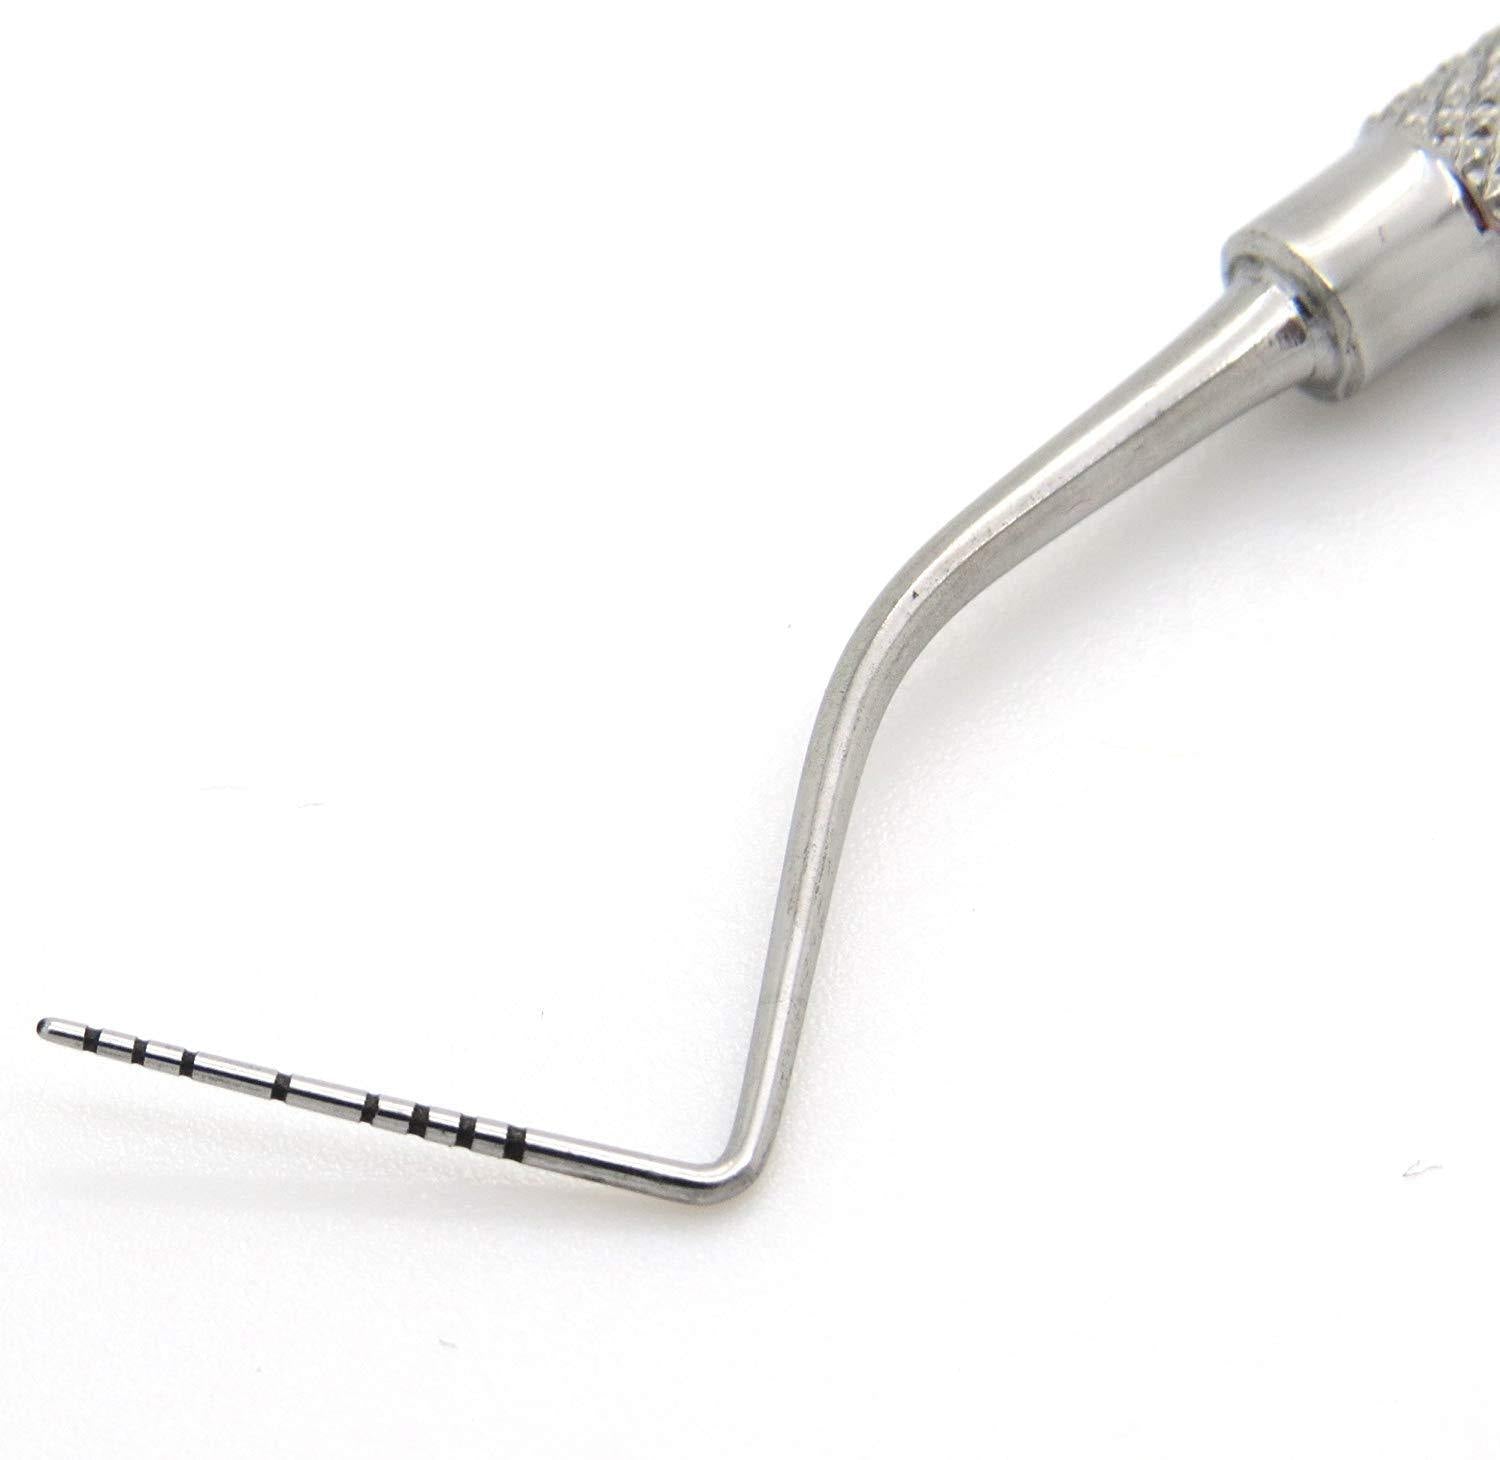 Probes – Williams, with Markings, Single End – 3Z Dental